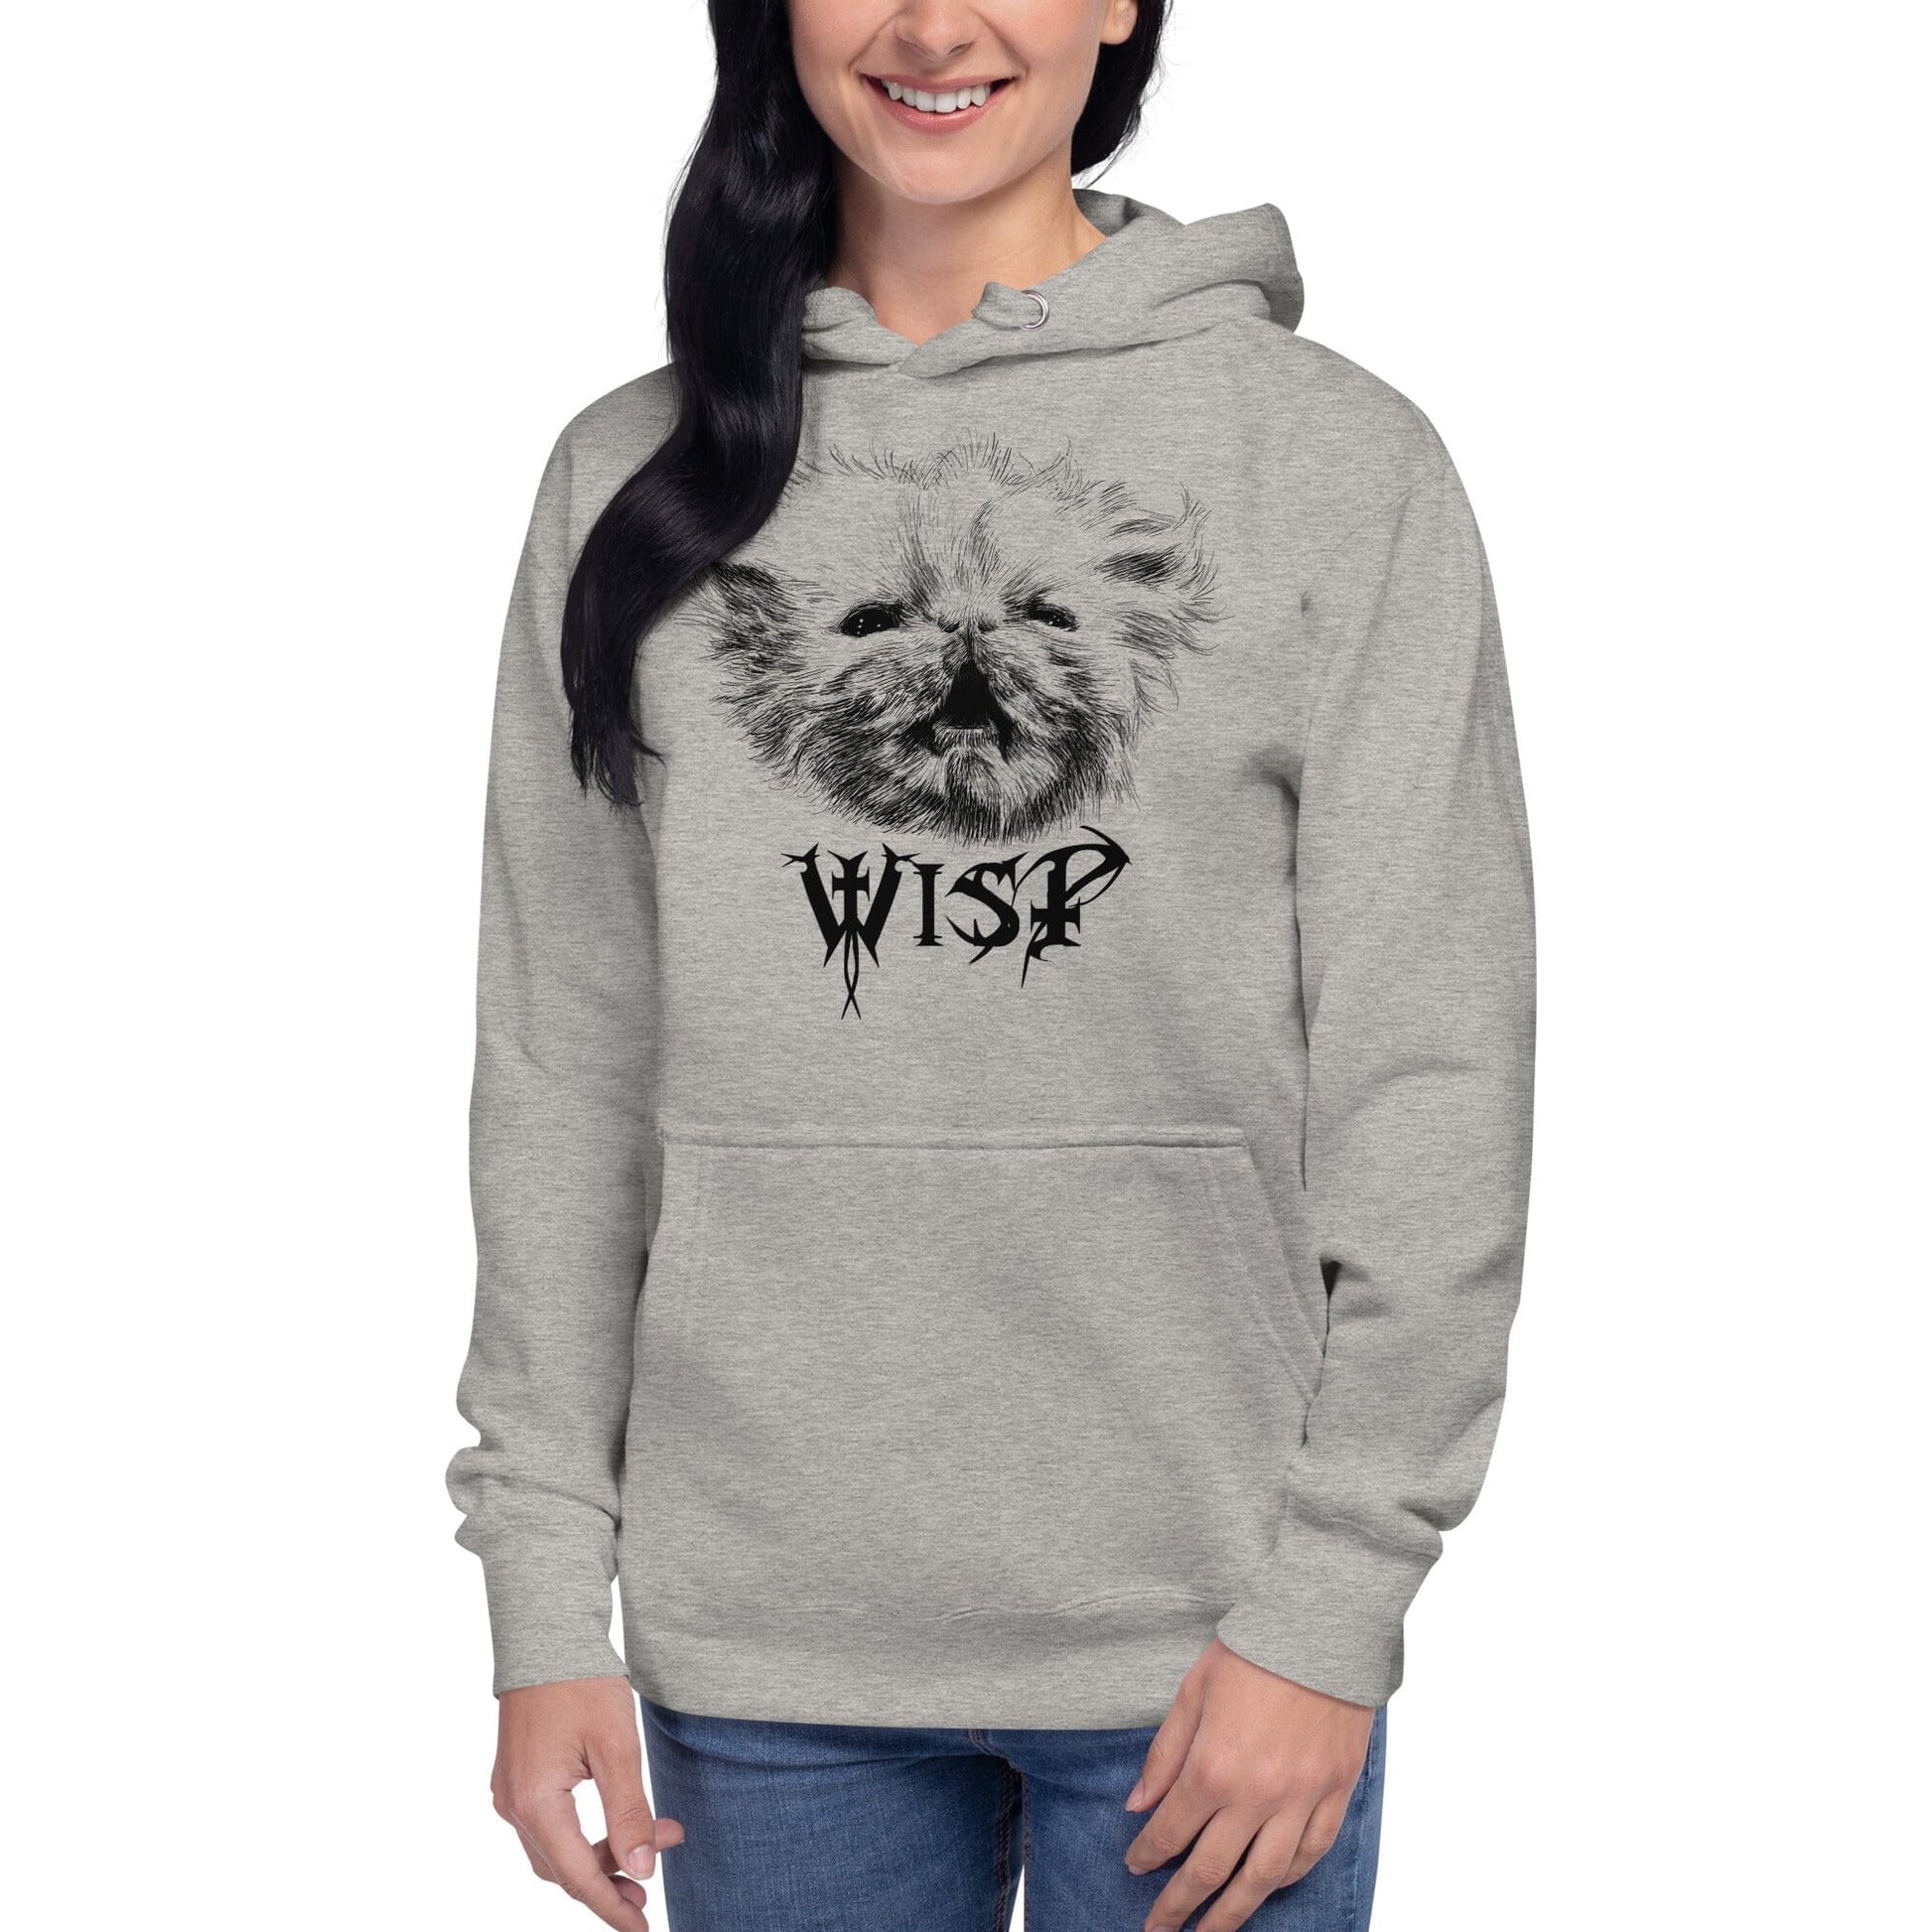 Metal Wisp Hoodie [Unfoiled] (All net proceeds go to Rags to Riches Animal Rescue) JoyousJoyfulJoyness Carbon Grey S 